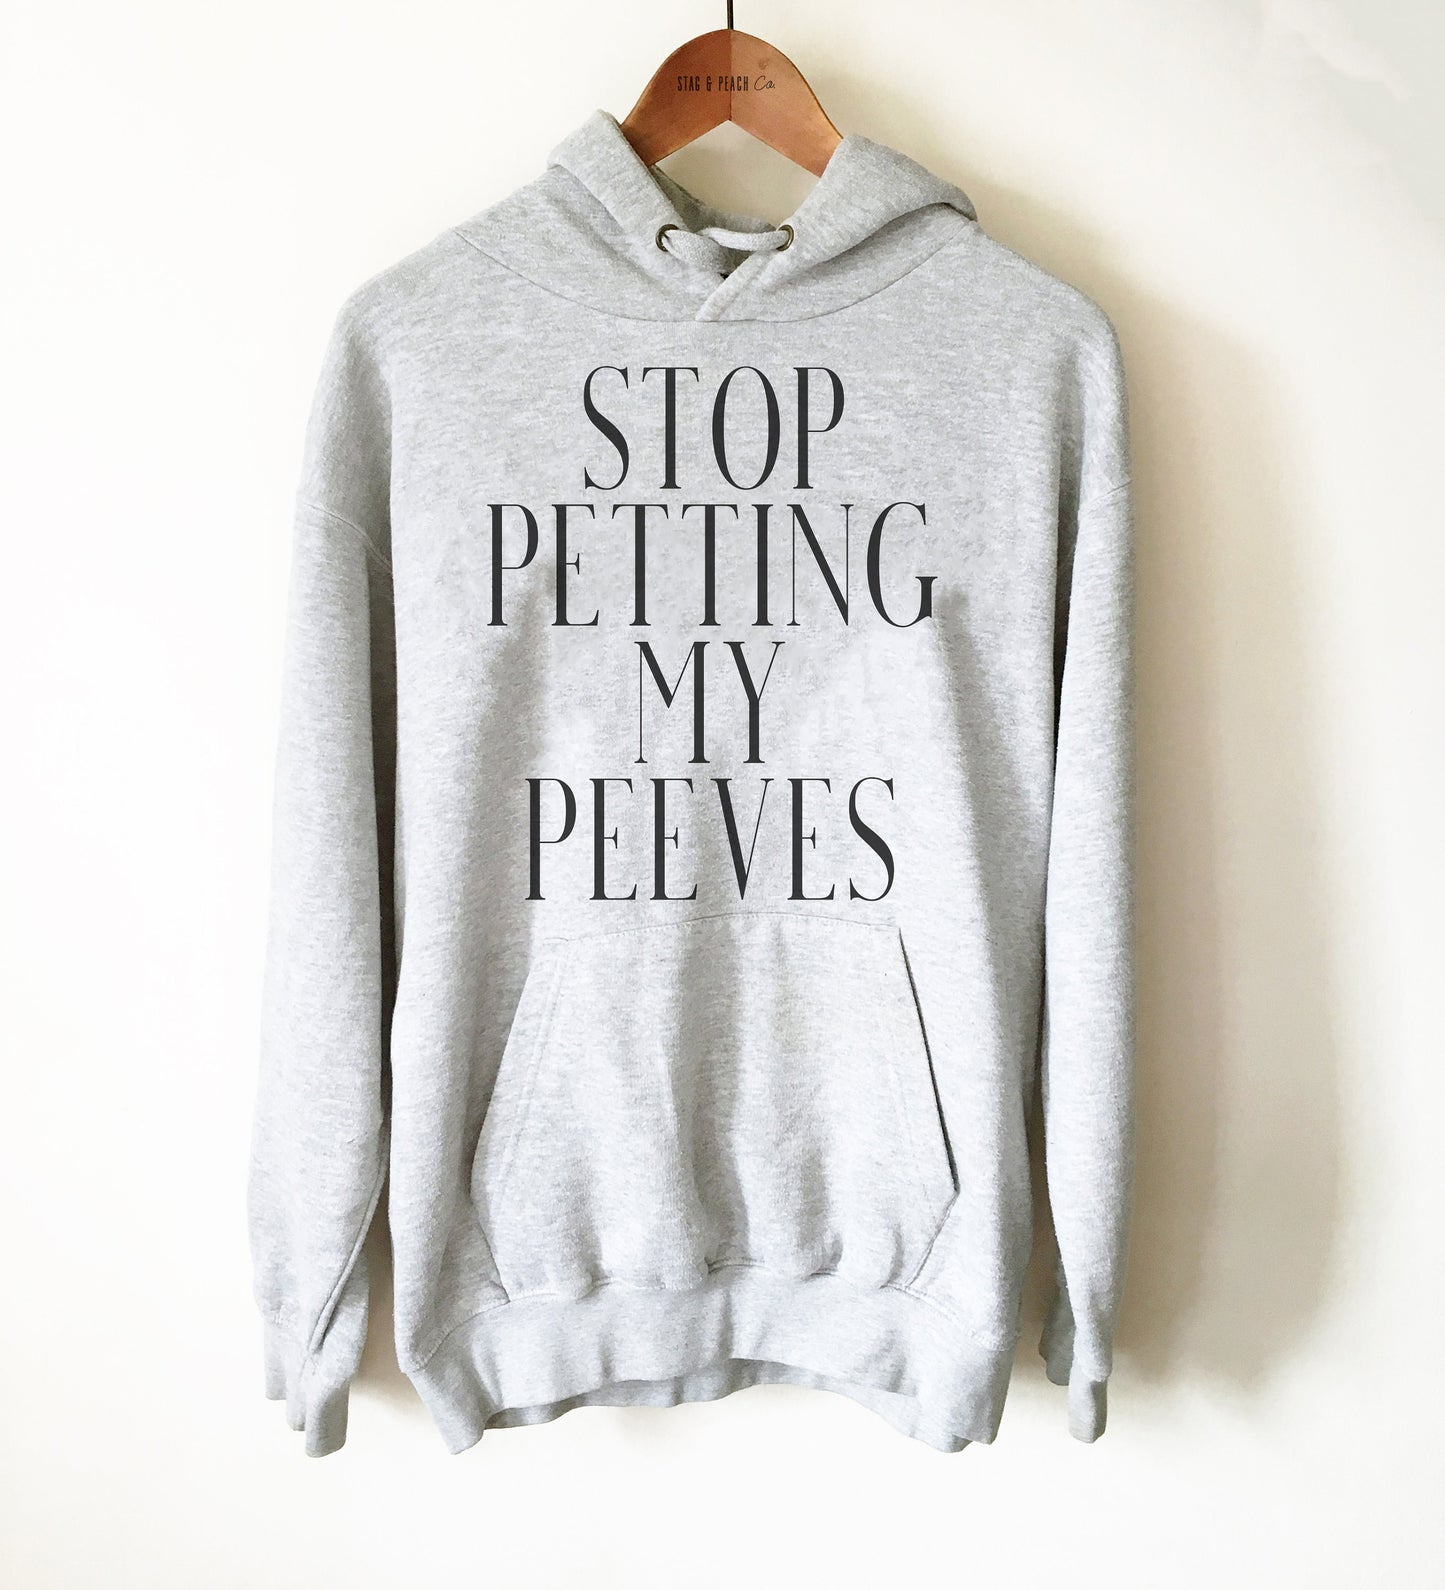 Stop Petting My Peeves Unisex Hoodie - Dad Shirt, Gift For Husband, Pet Peeves Shirt, Fathers Day Gift, Gift For Boss, Funny Birthday Ideas